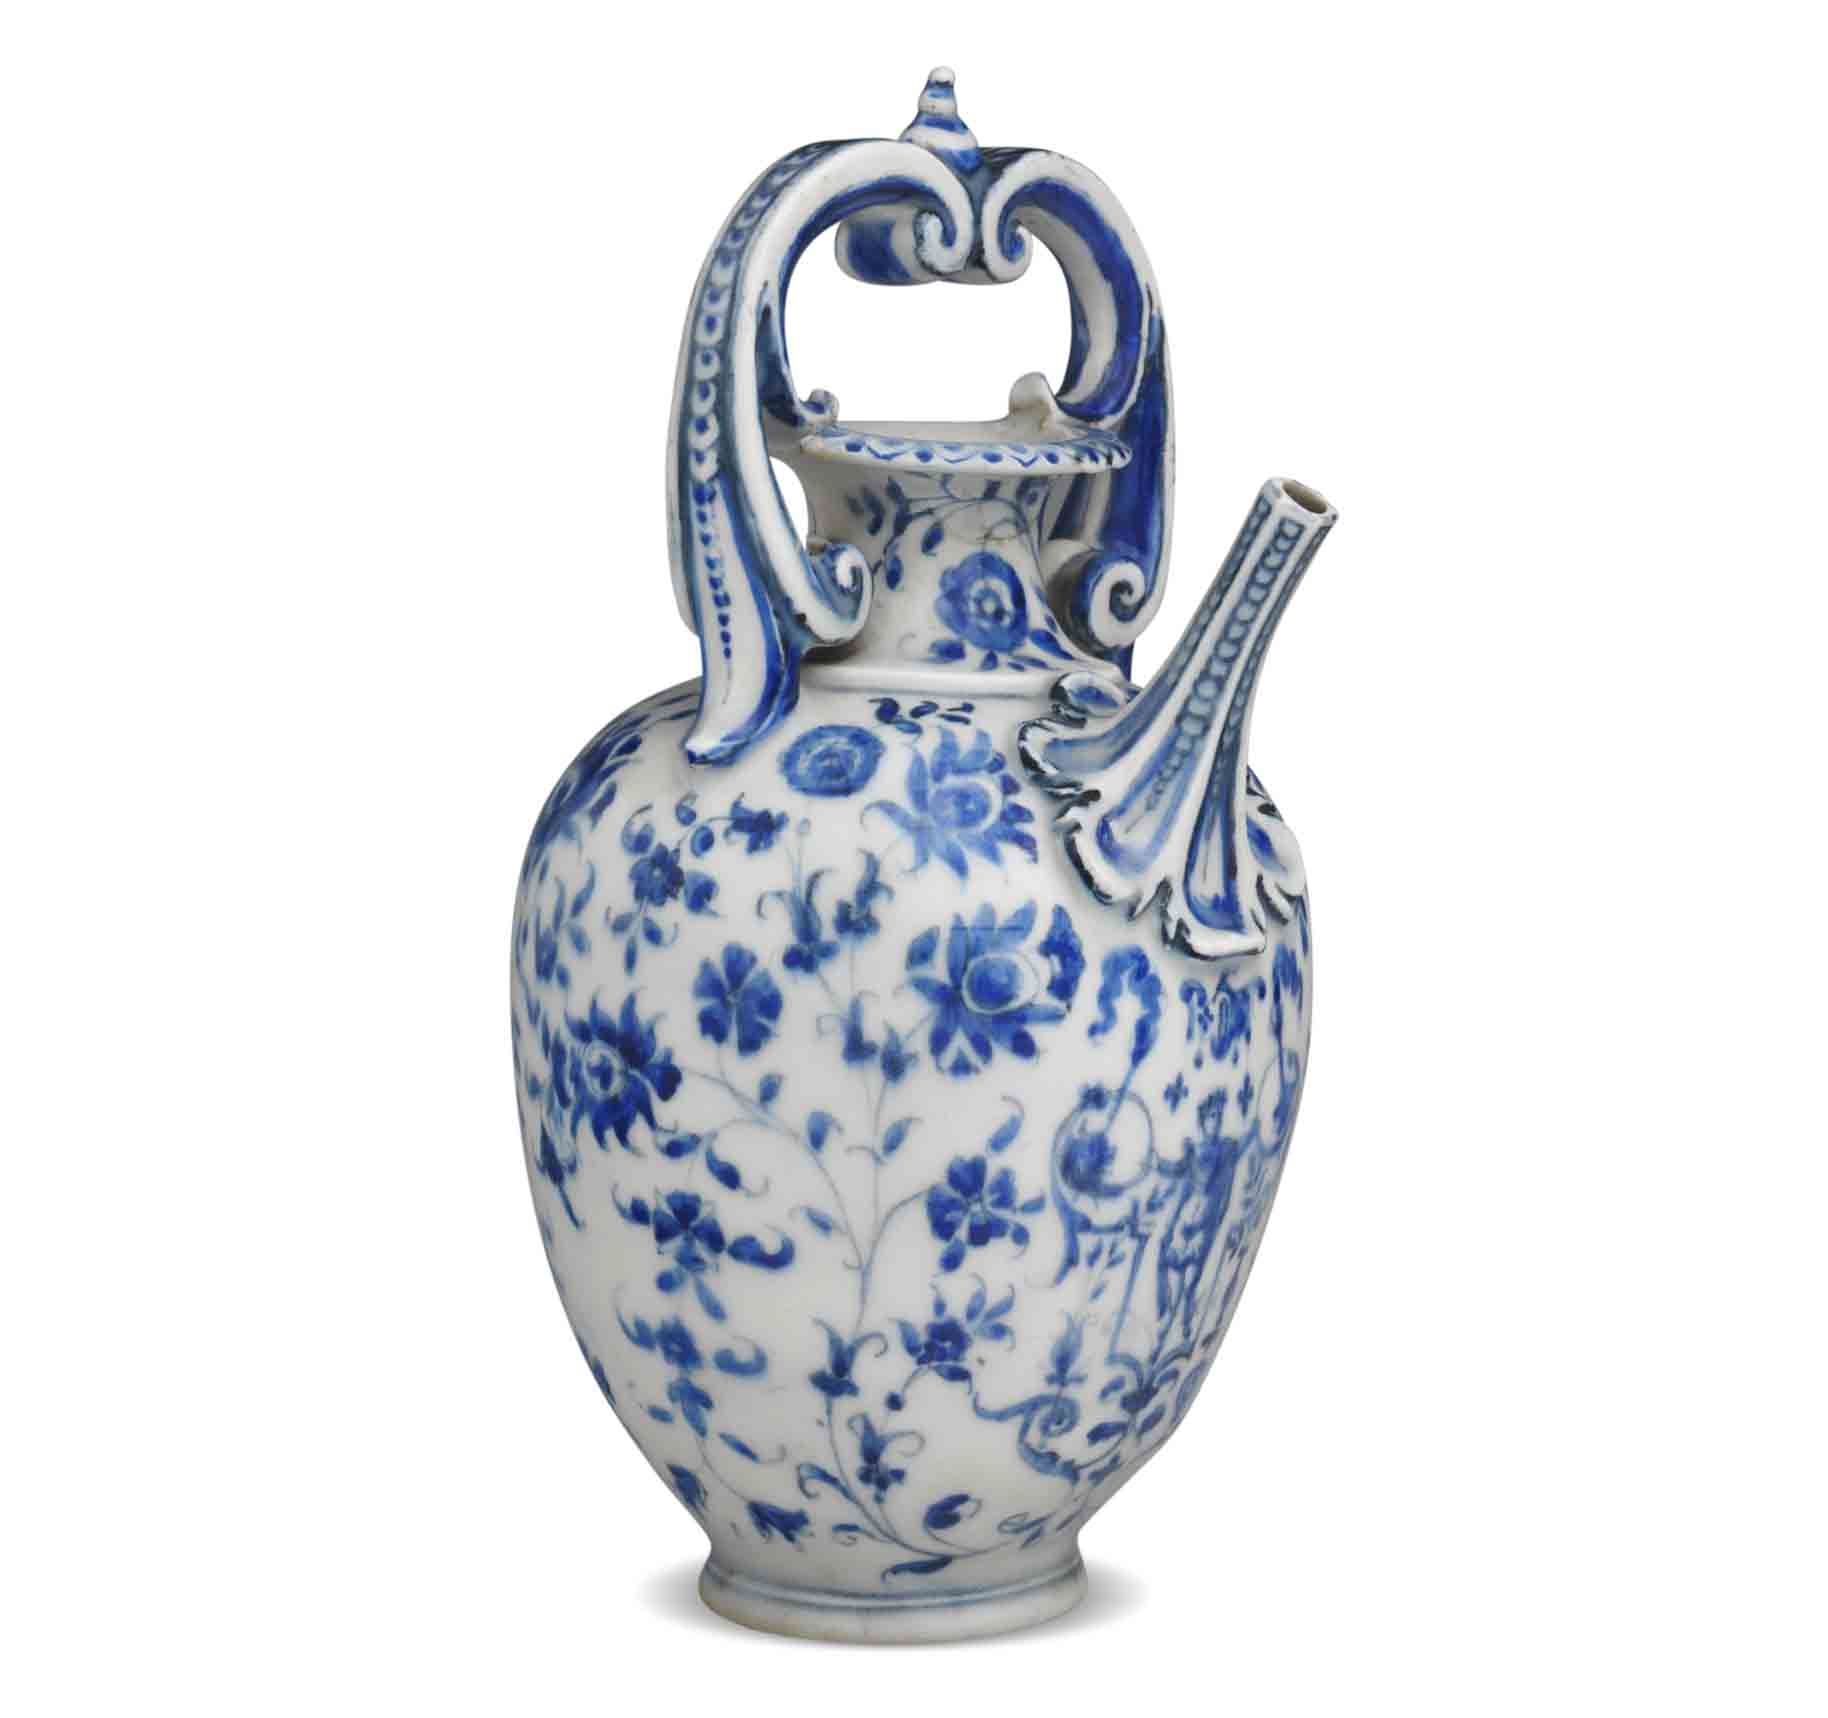 blue and white ceramics in the italian style with an ornamental handle and spout with a floral pattern all over